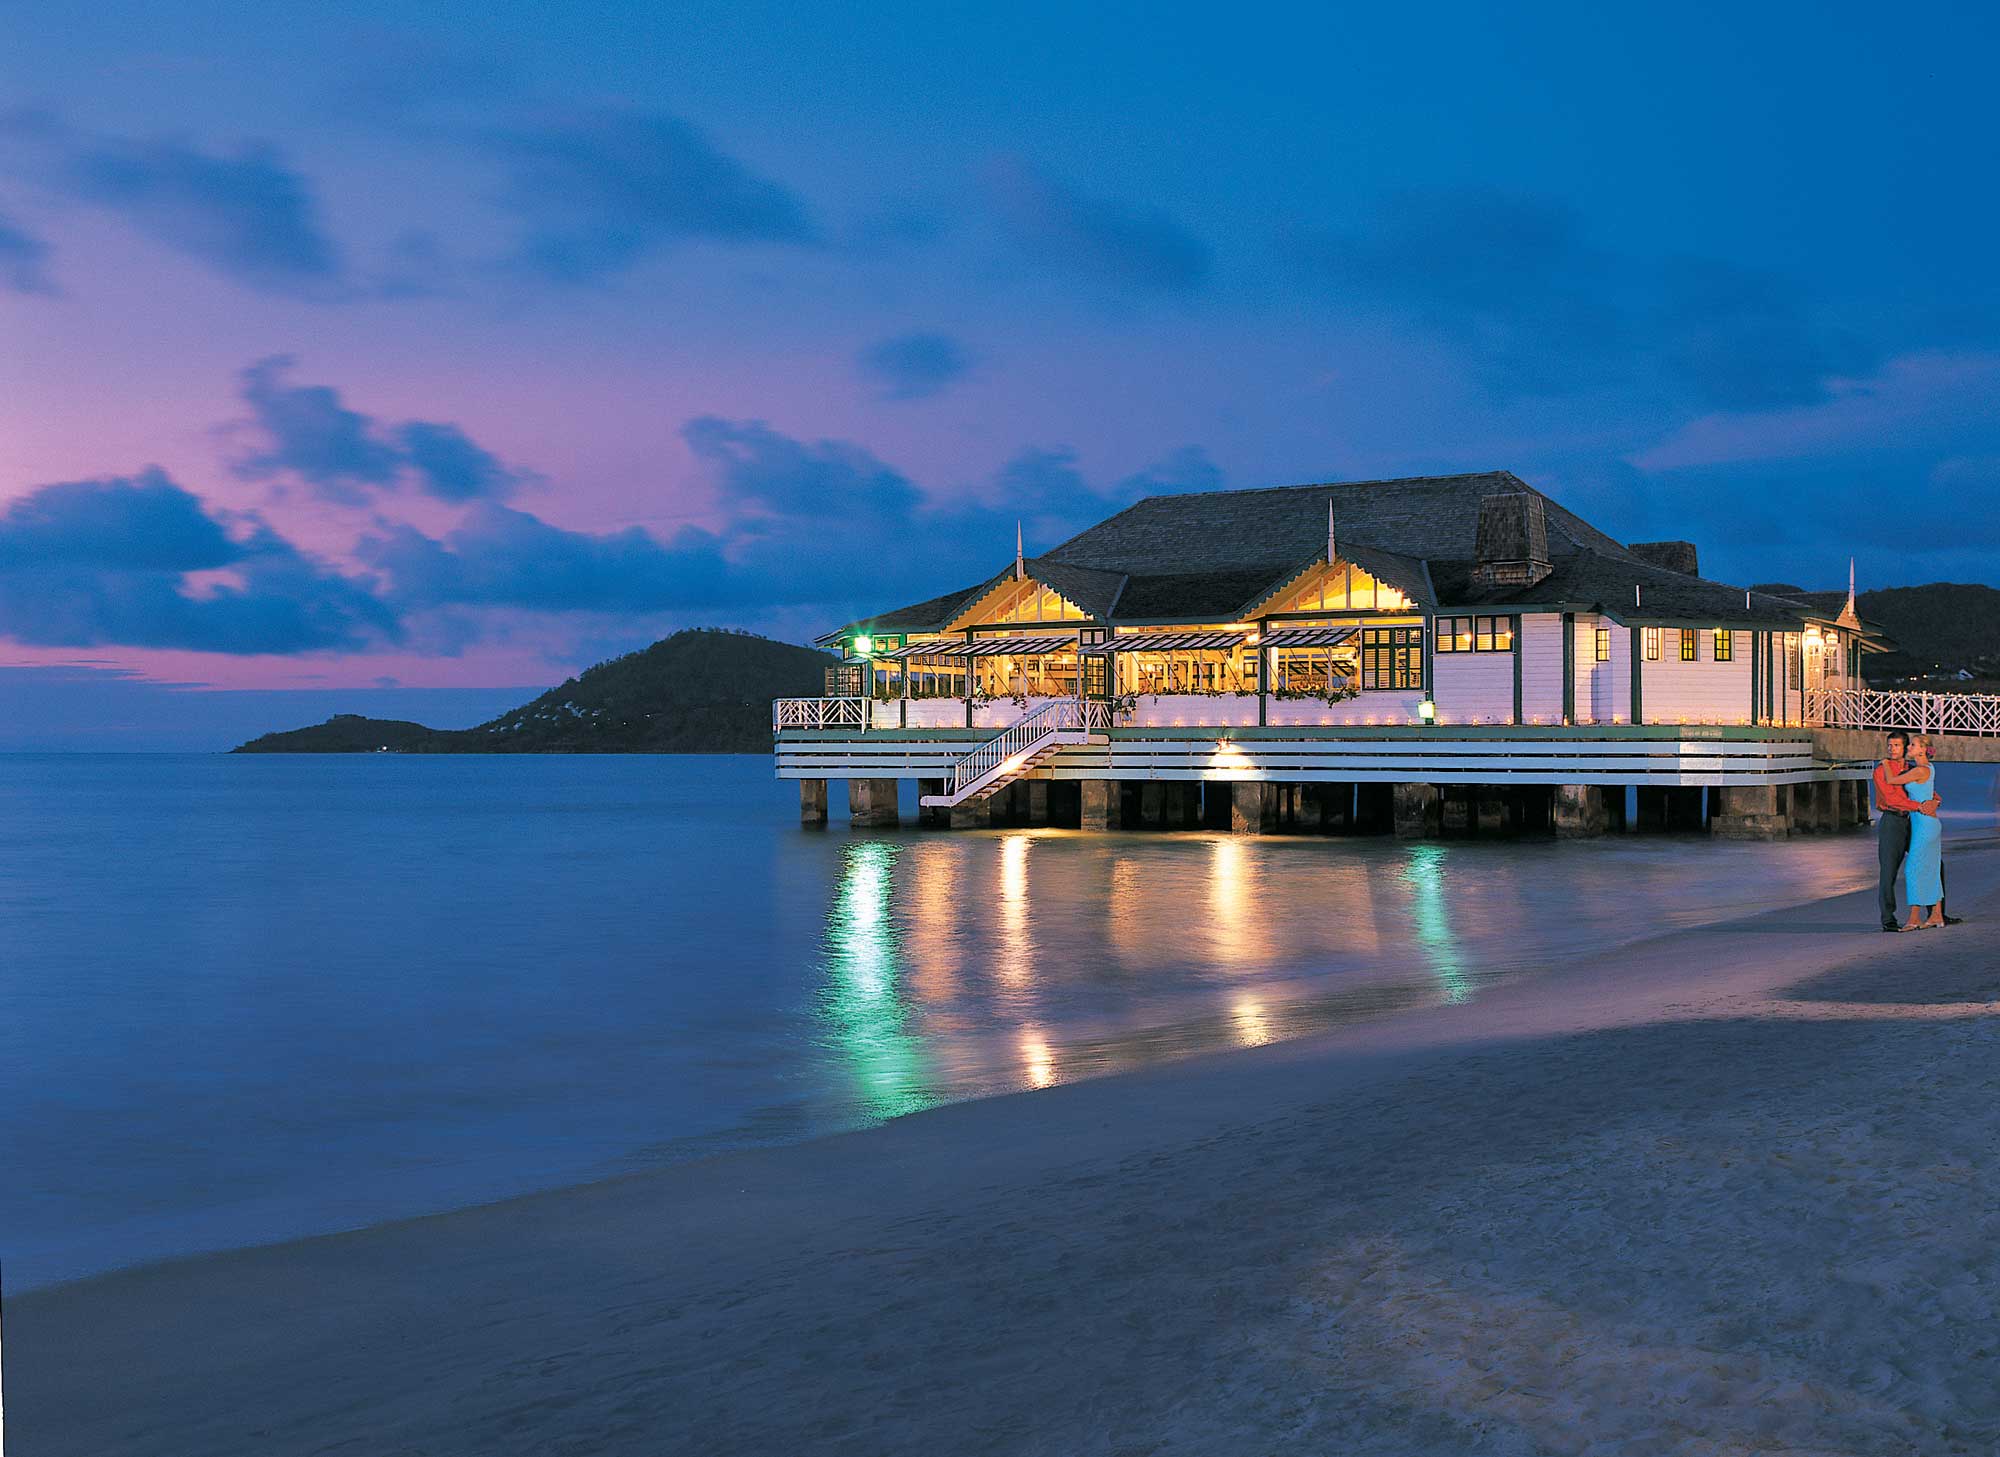 Best Caribbean All-Inclusive Resorts | All-Inclusive Weddings And Honeymoons | Sandals Halcyon Beach, St. Lucia